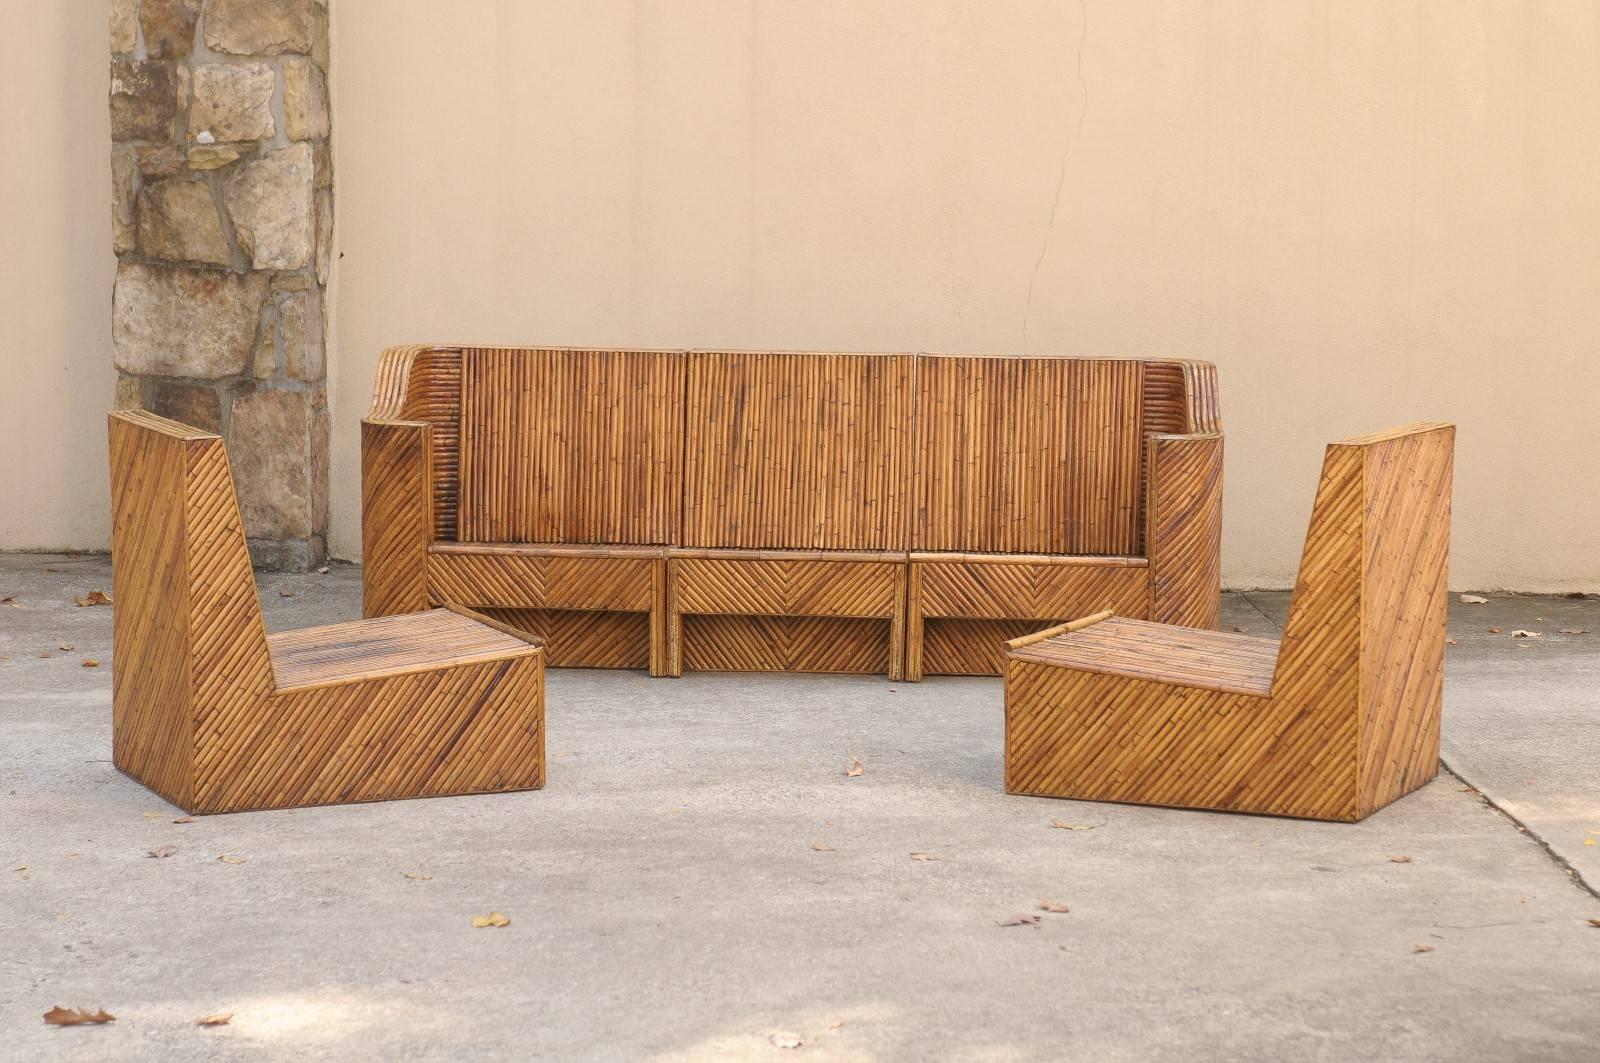 A fabulous seven-piece seating set, circa 1975. A stylish and functional set which may be used in a number of configurations. Stout and expertly constructed solid mahogany frame completely veneered in diagonally applied pencil bamboo. Exceptional